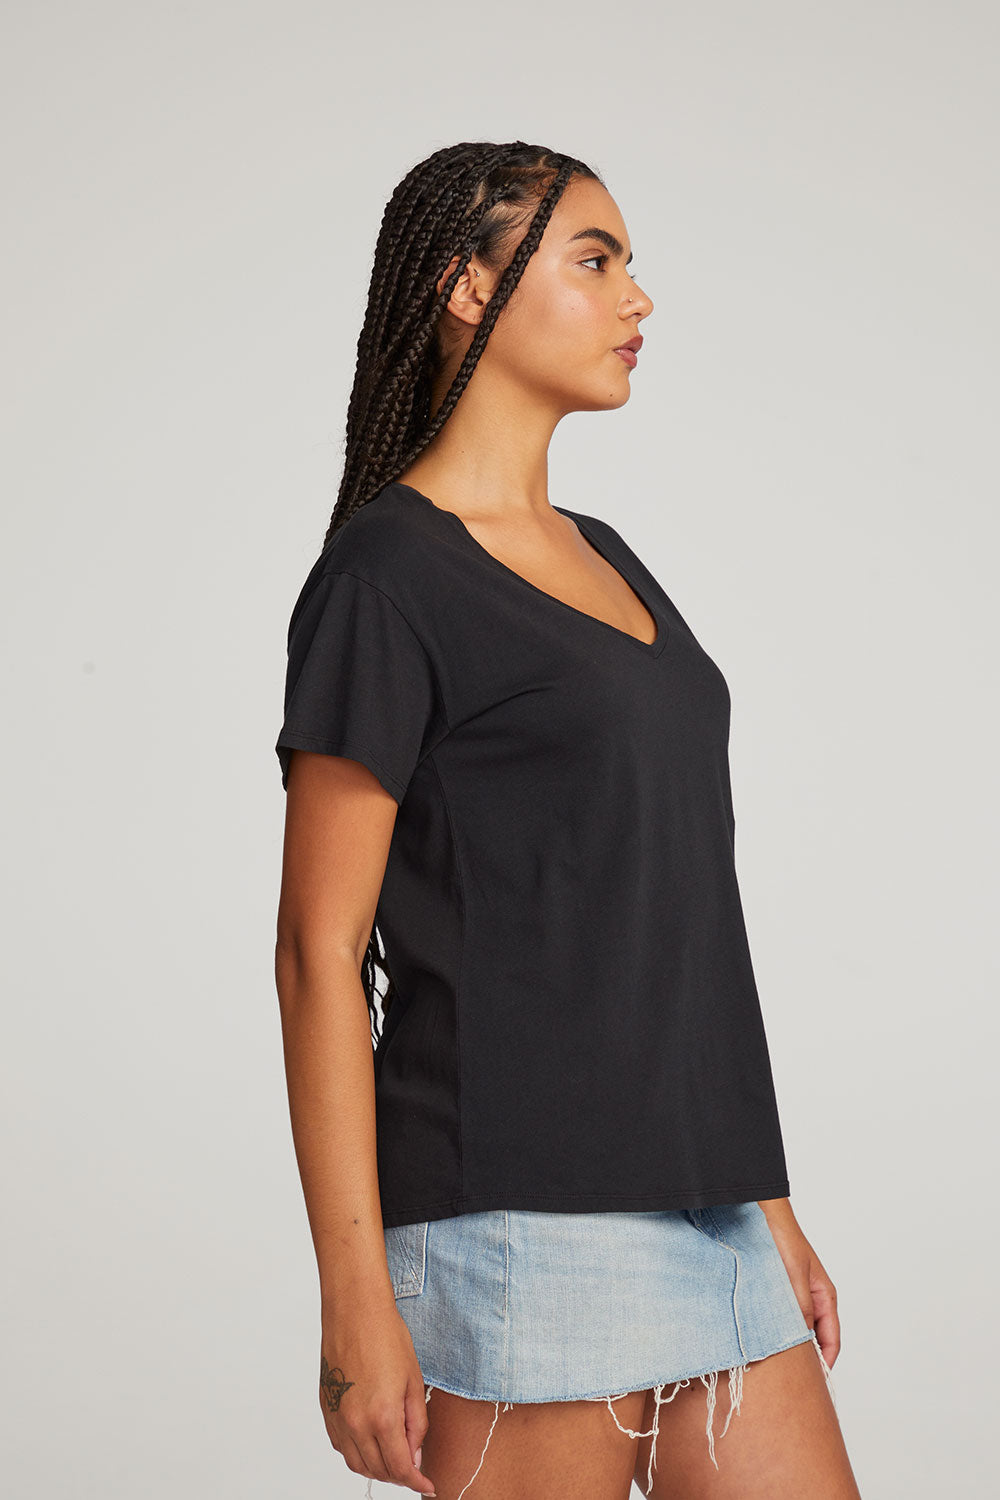 Everyday Essential Black V-neck Tee WOMENS chaserbrand